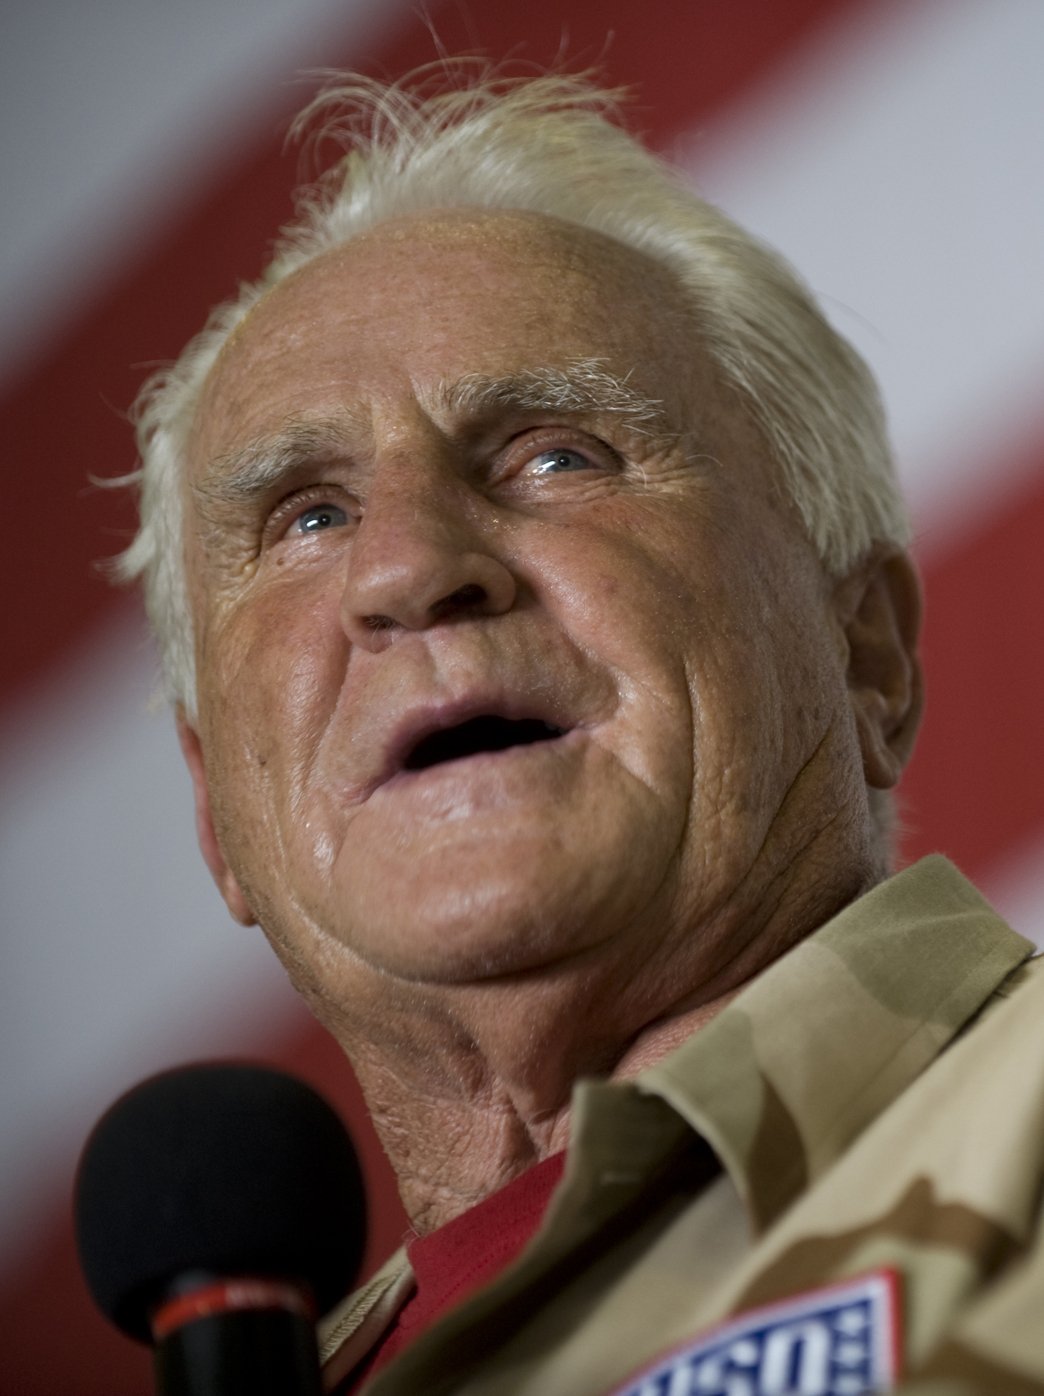 Don Shula addresses the crew of aircraft carrier USS Ronald Reagan (CVN 76), under way in the Gulf of Oman, July 13, 2009 | Photo: GettyImages